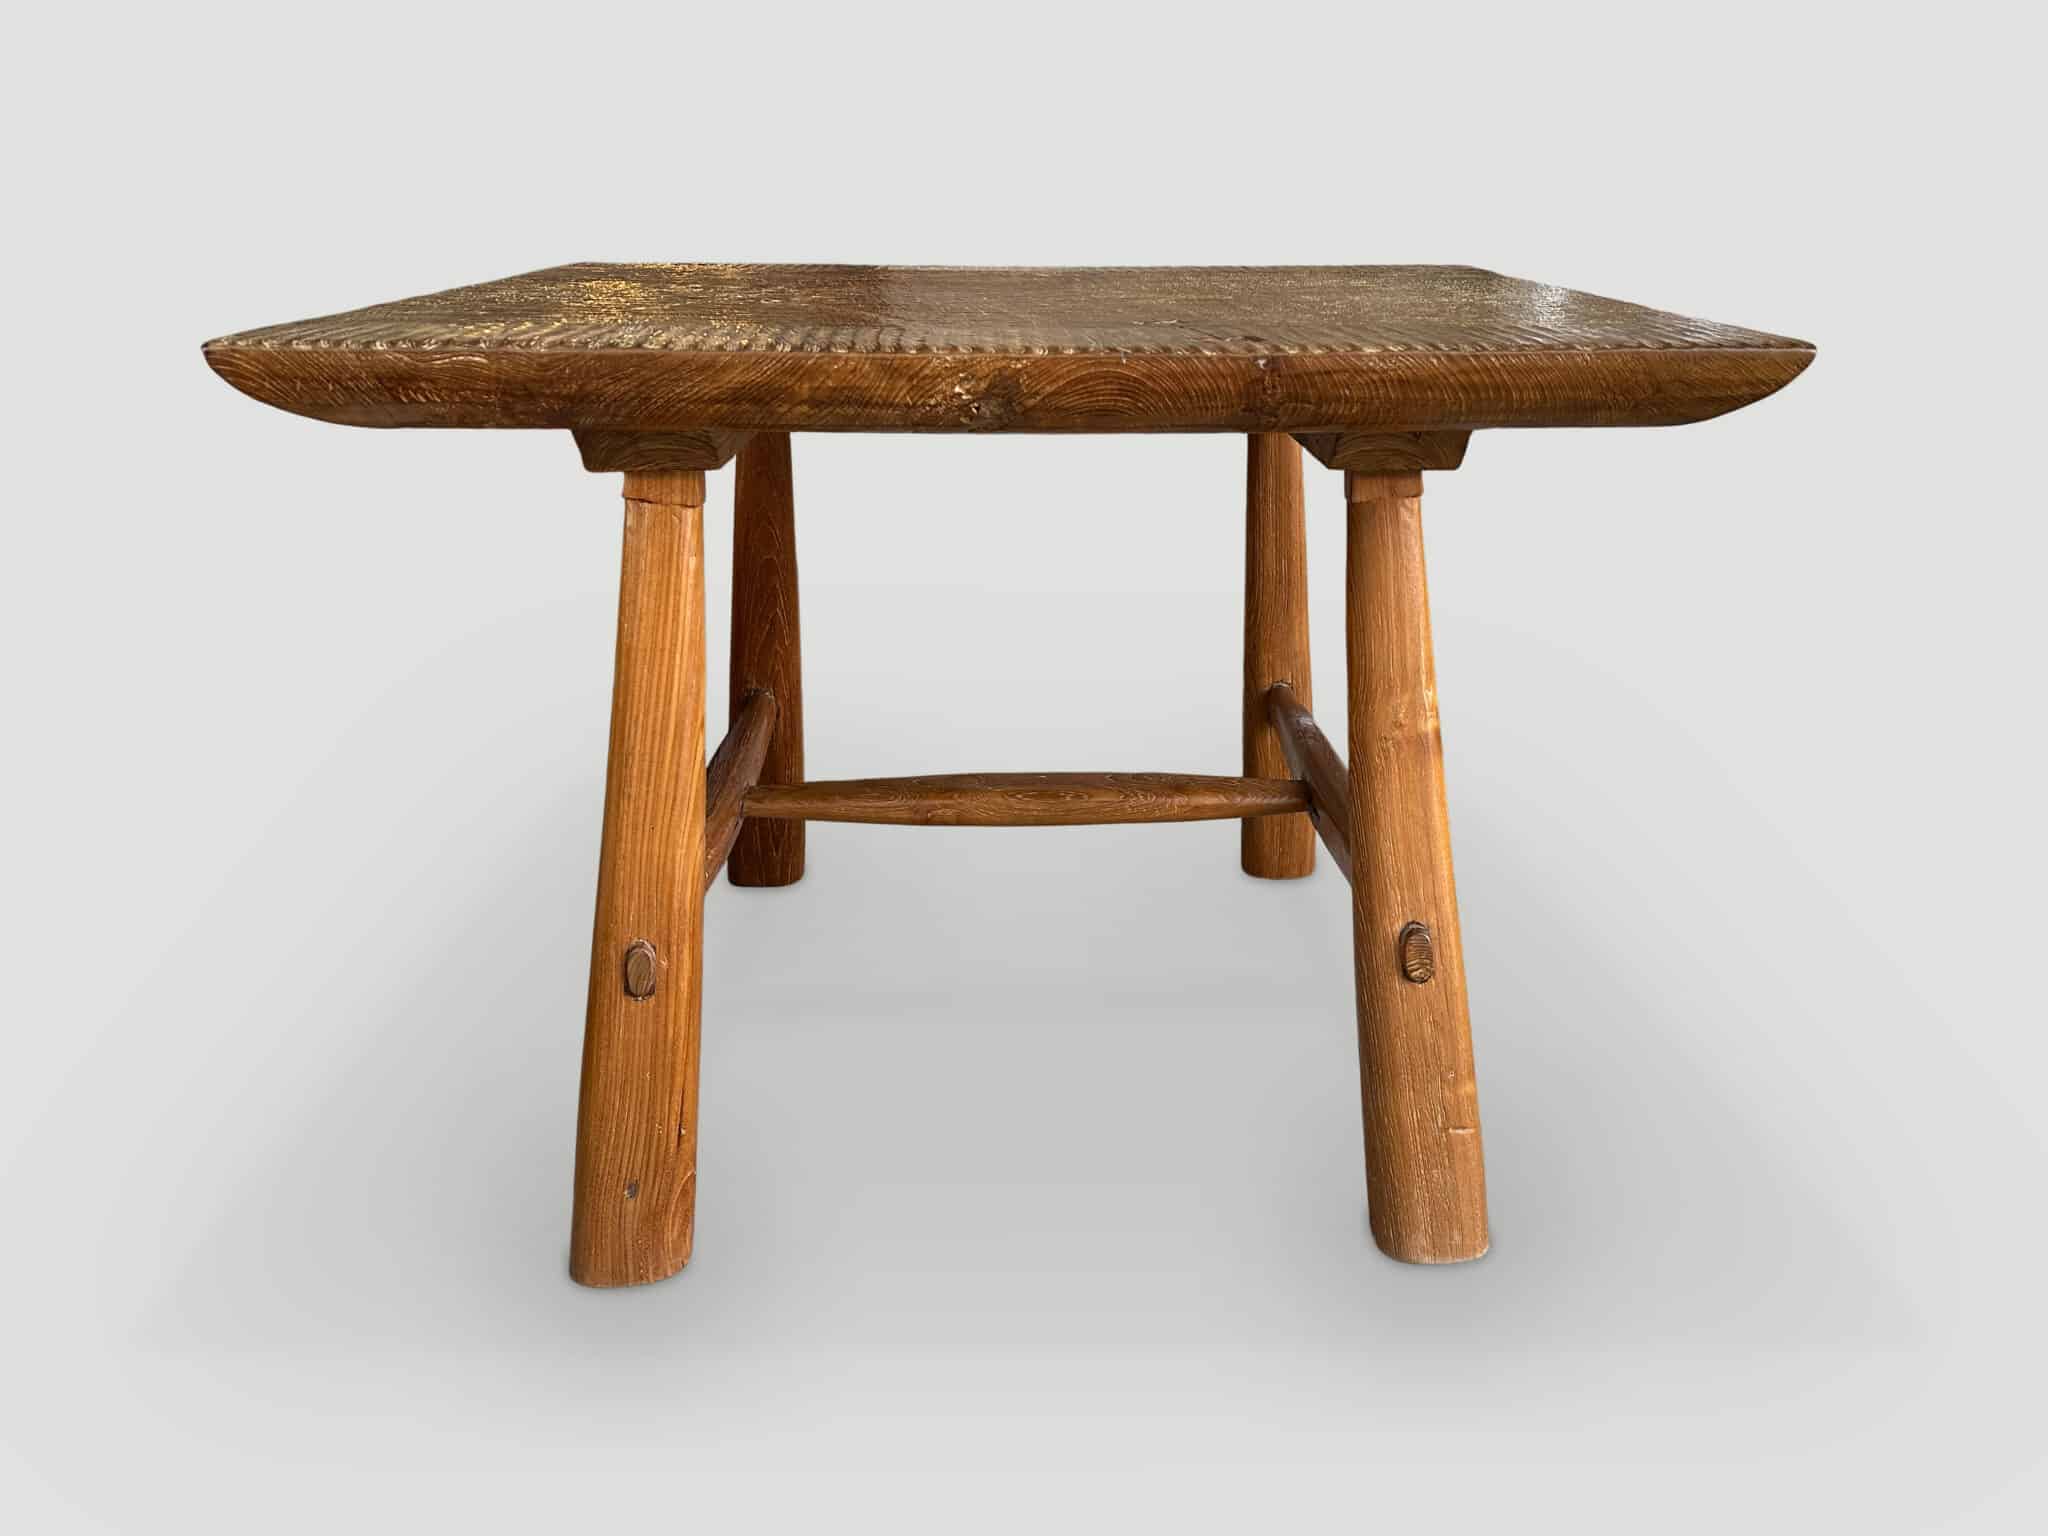 IMPRESSIVE HAND CARVED TEAK WOOD DINING TABLE, SIDE TABLE OR ENTRY TABLE